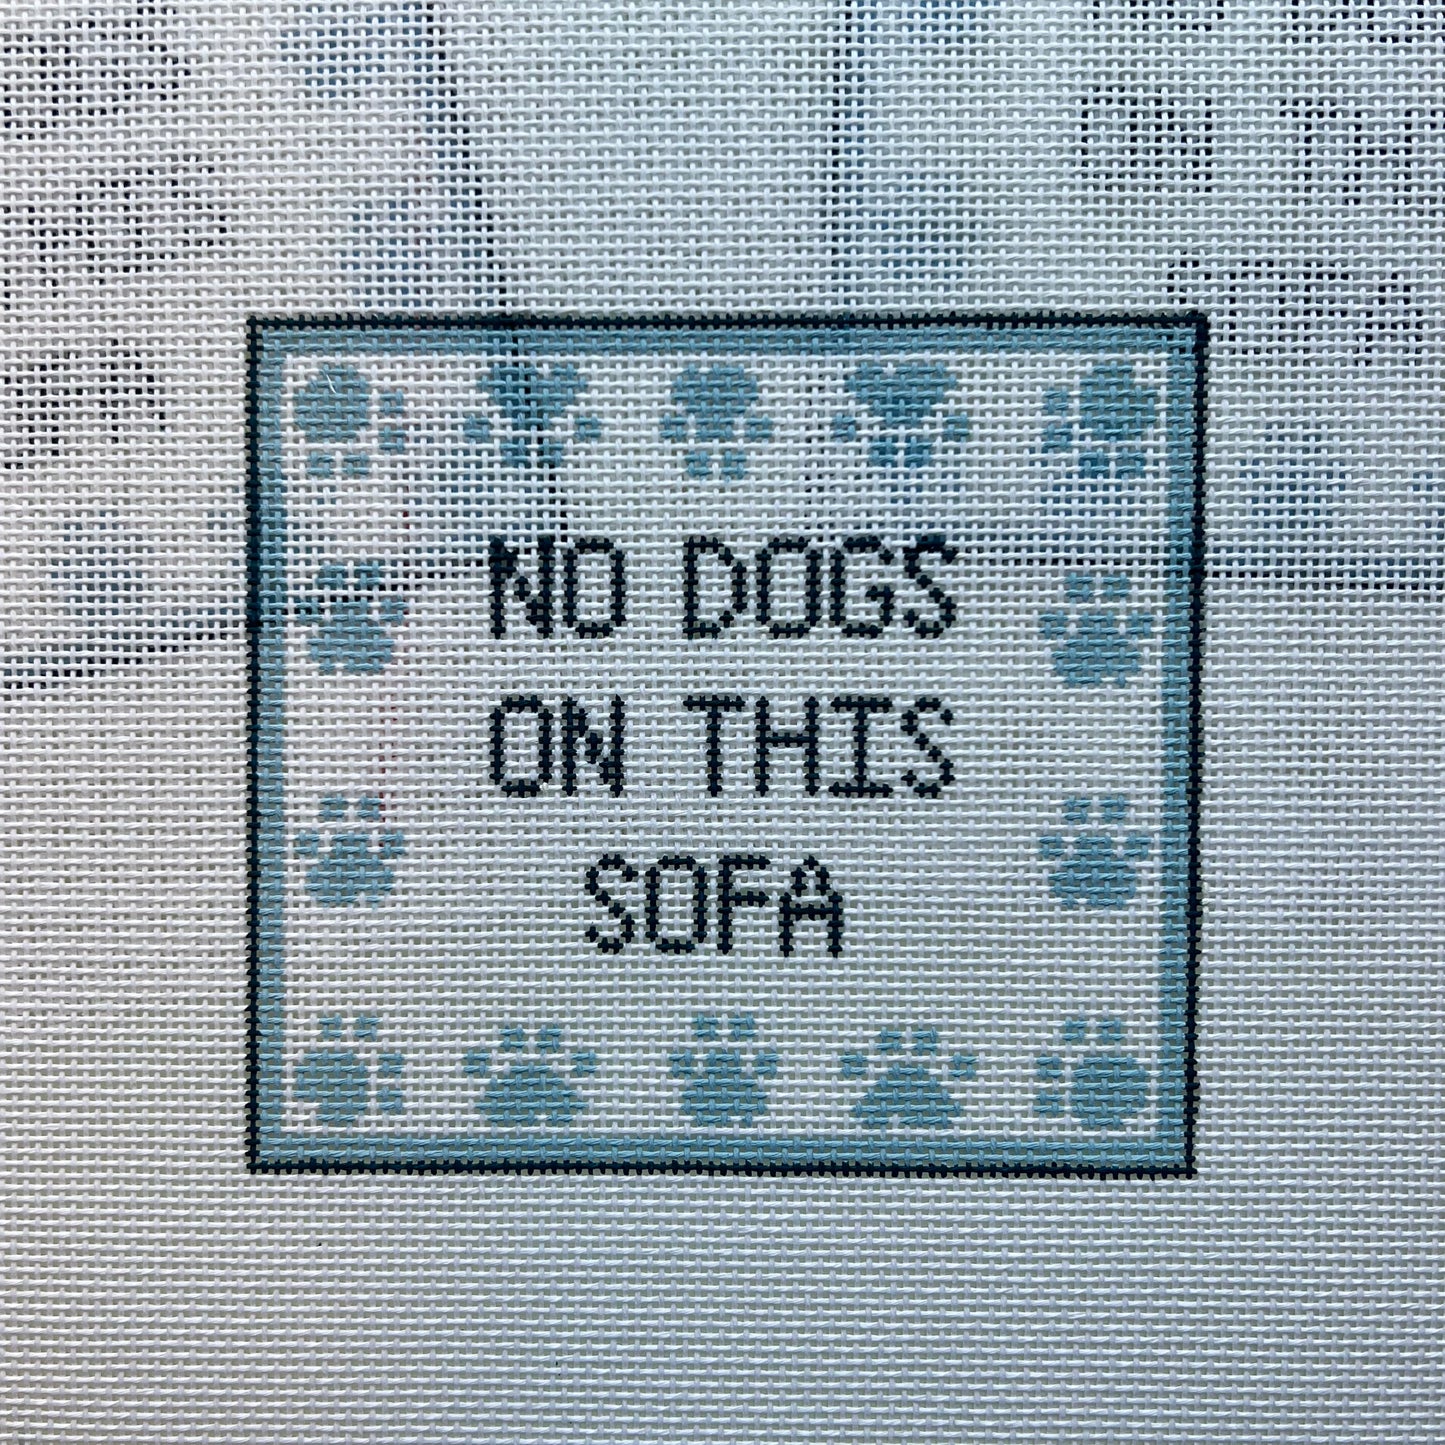 No Dogs On This Sofa